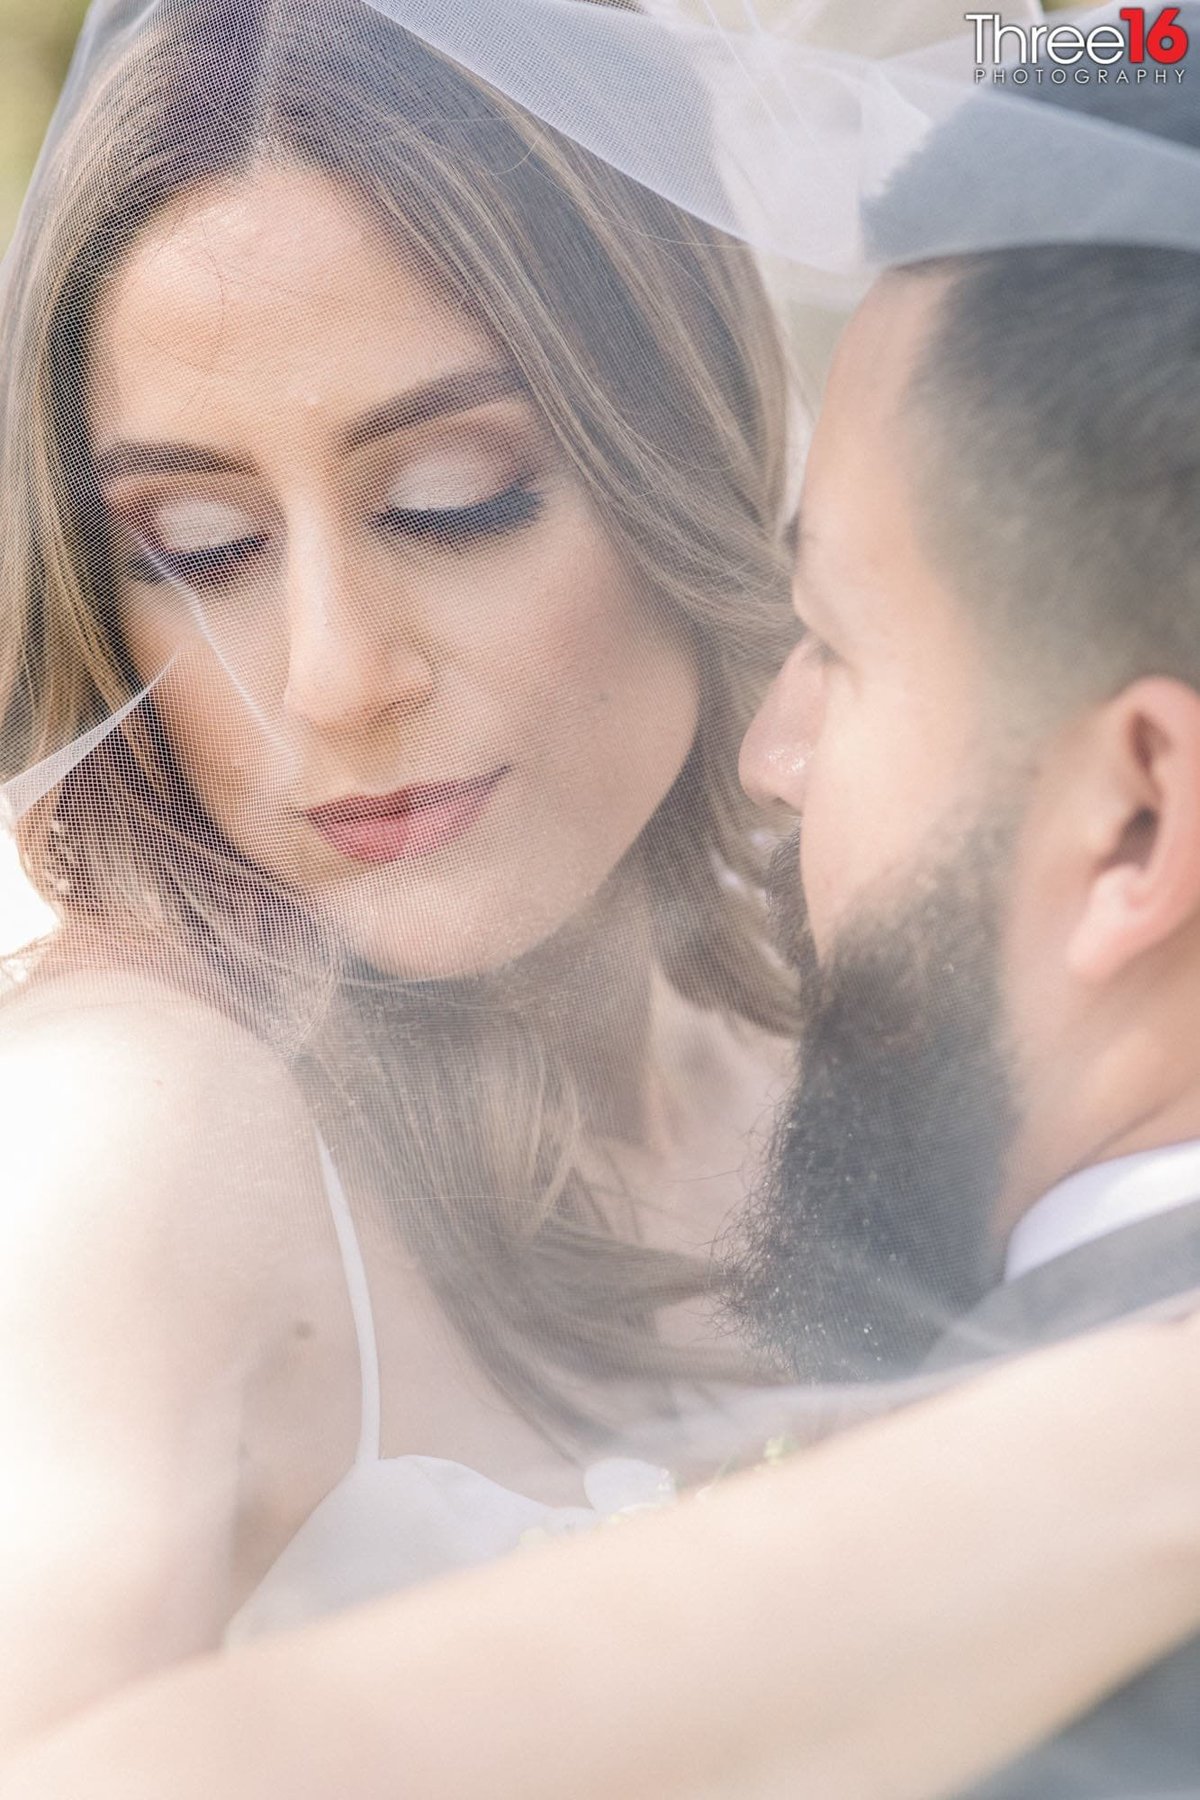 Intimate moment between Bride and Groom as they pose underneath her veil